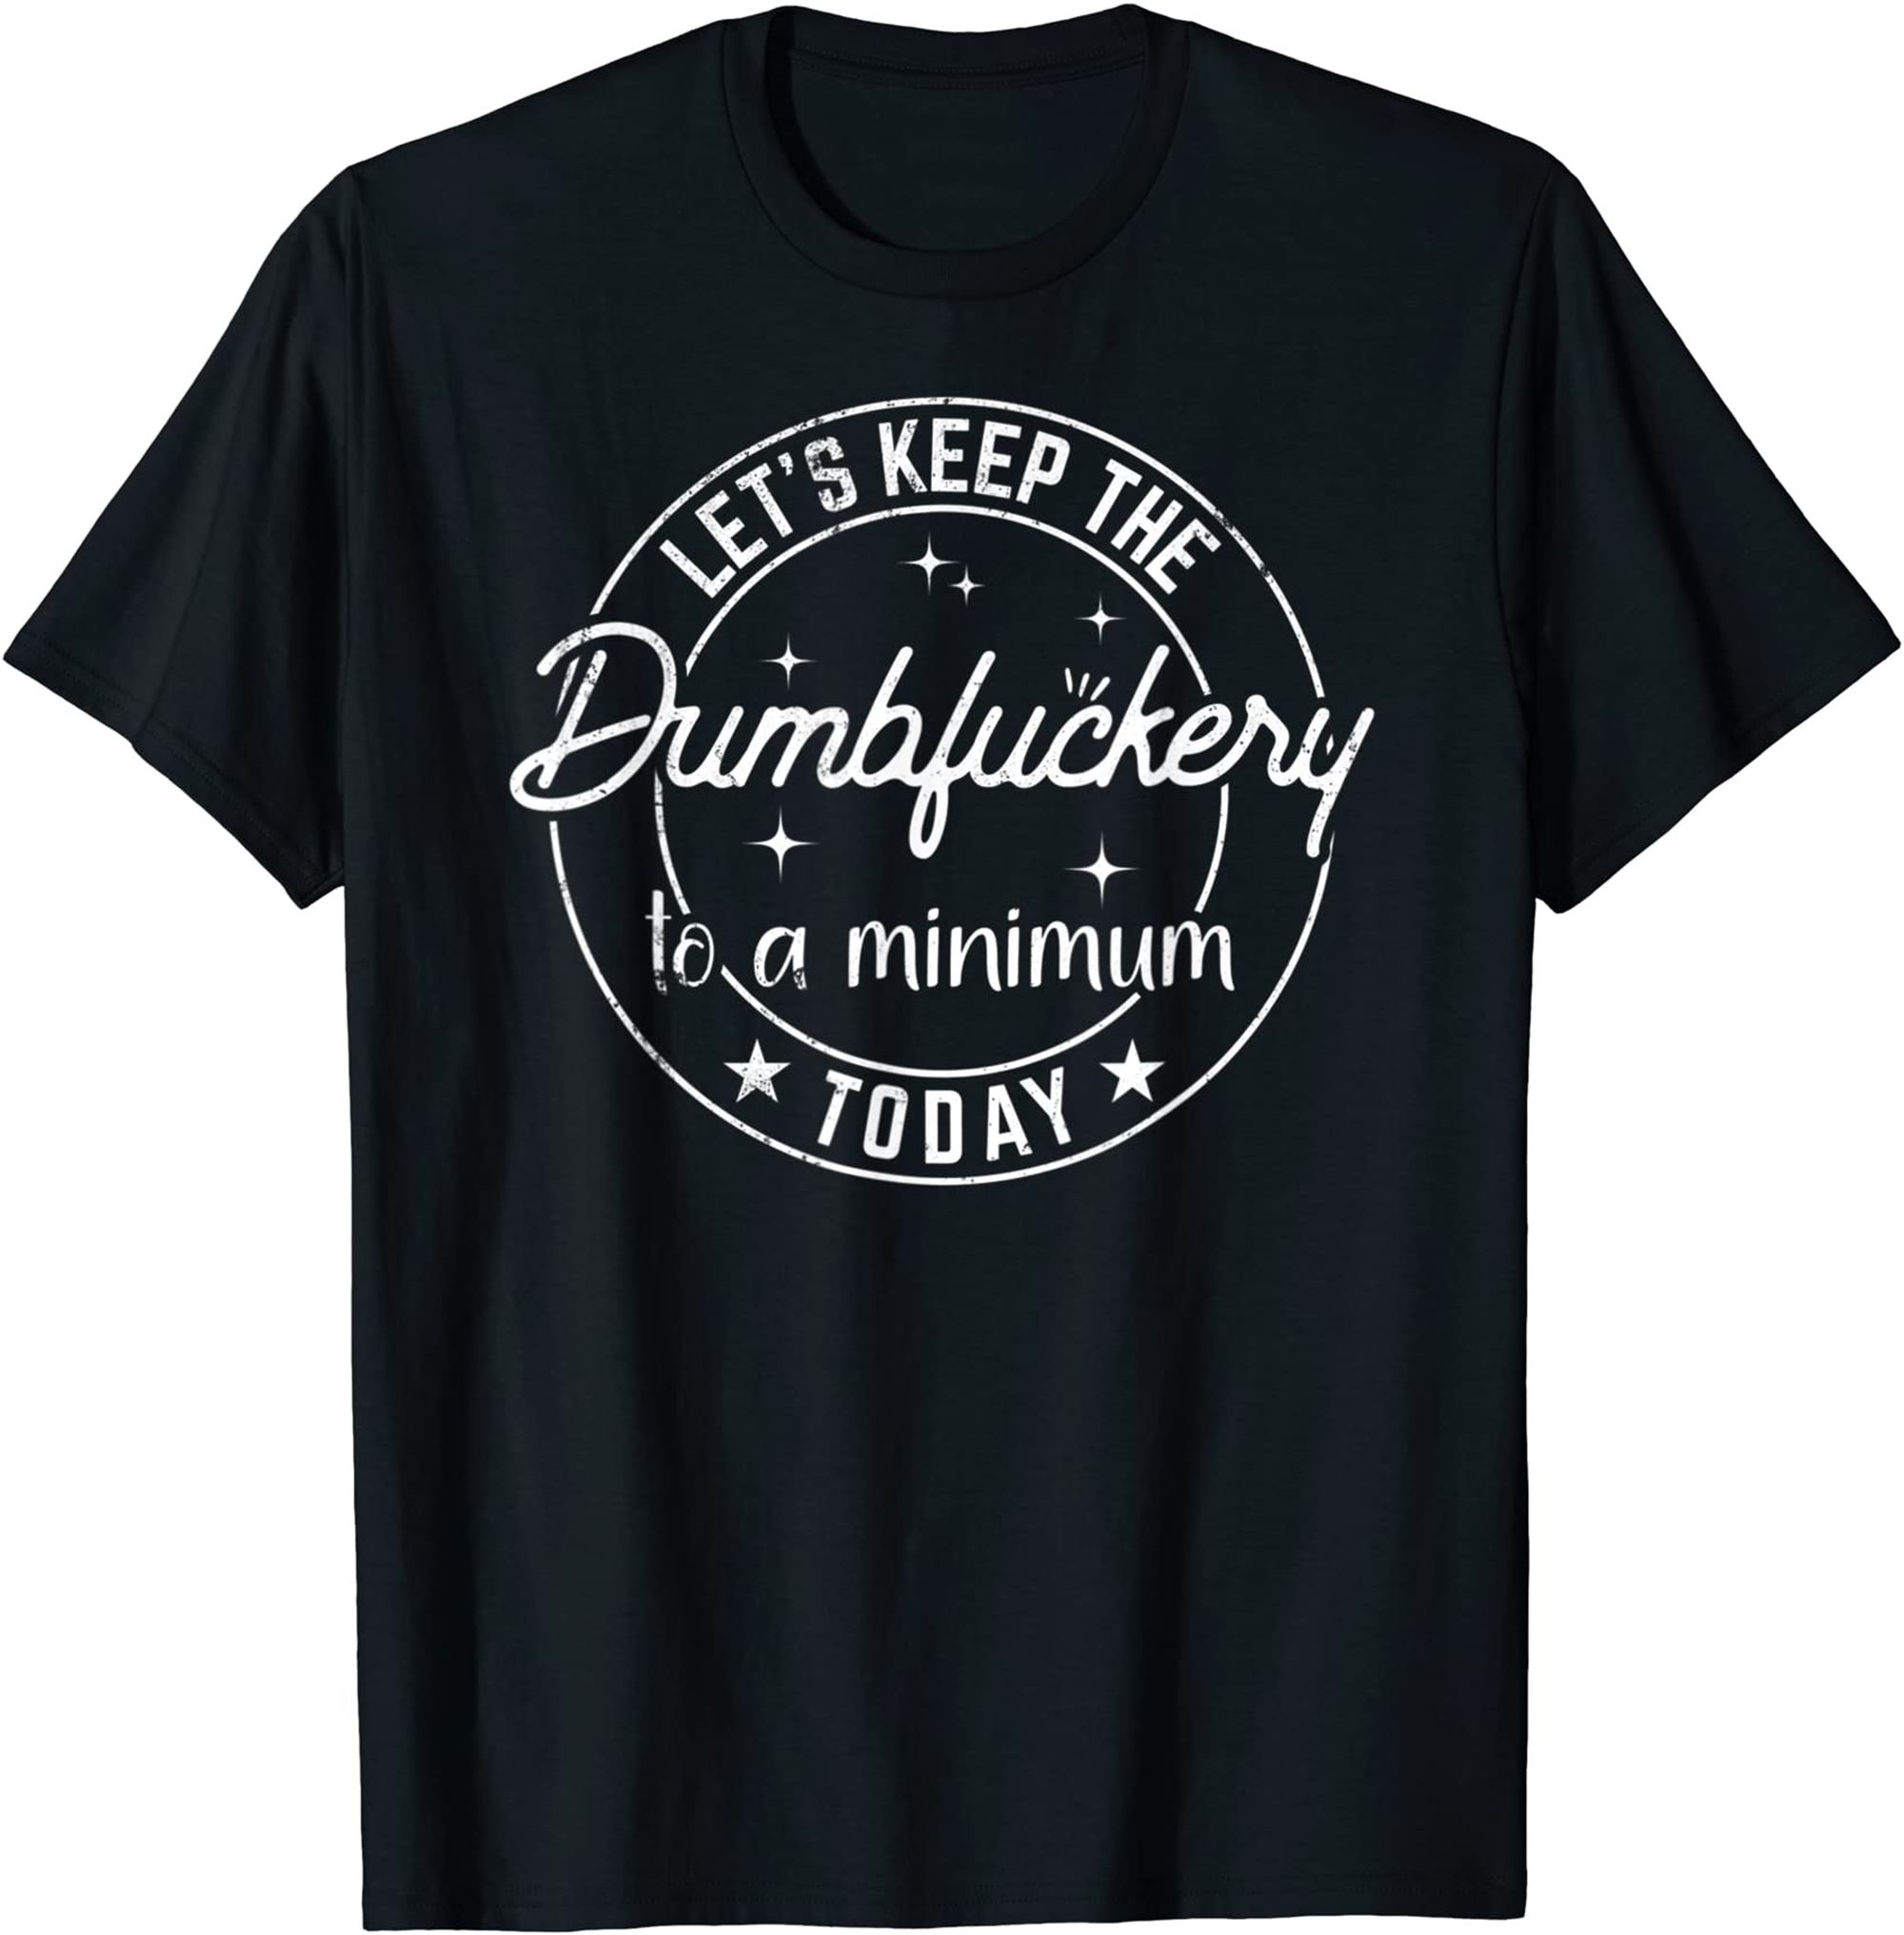 Funny Coworker Lets Keep The Dumbfuckery To A Minimum Today T-shirt Plus Size Up To 5xl